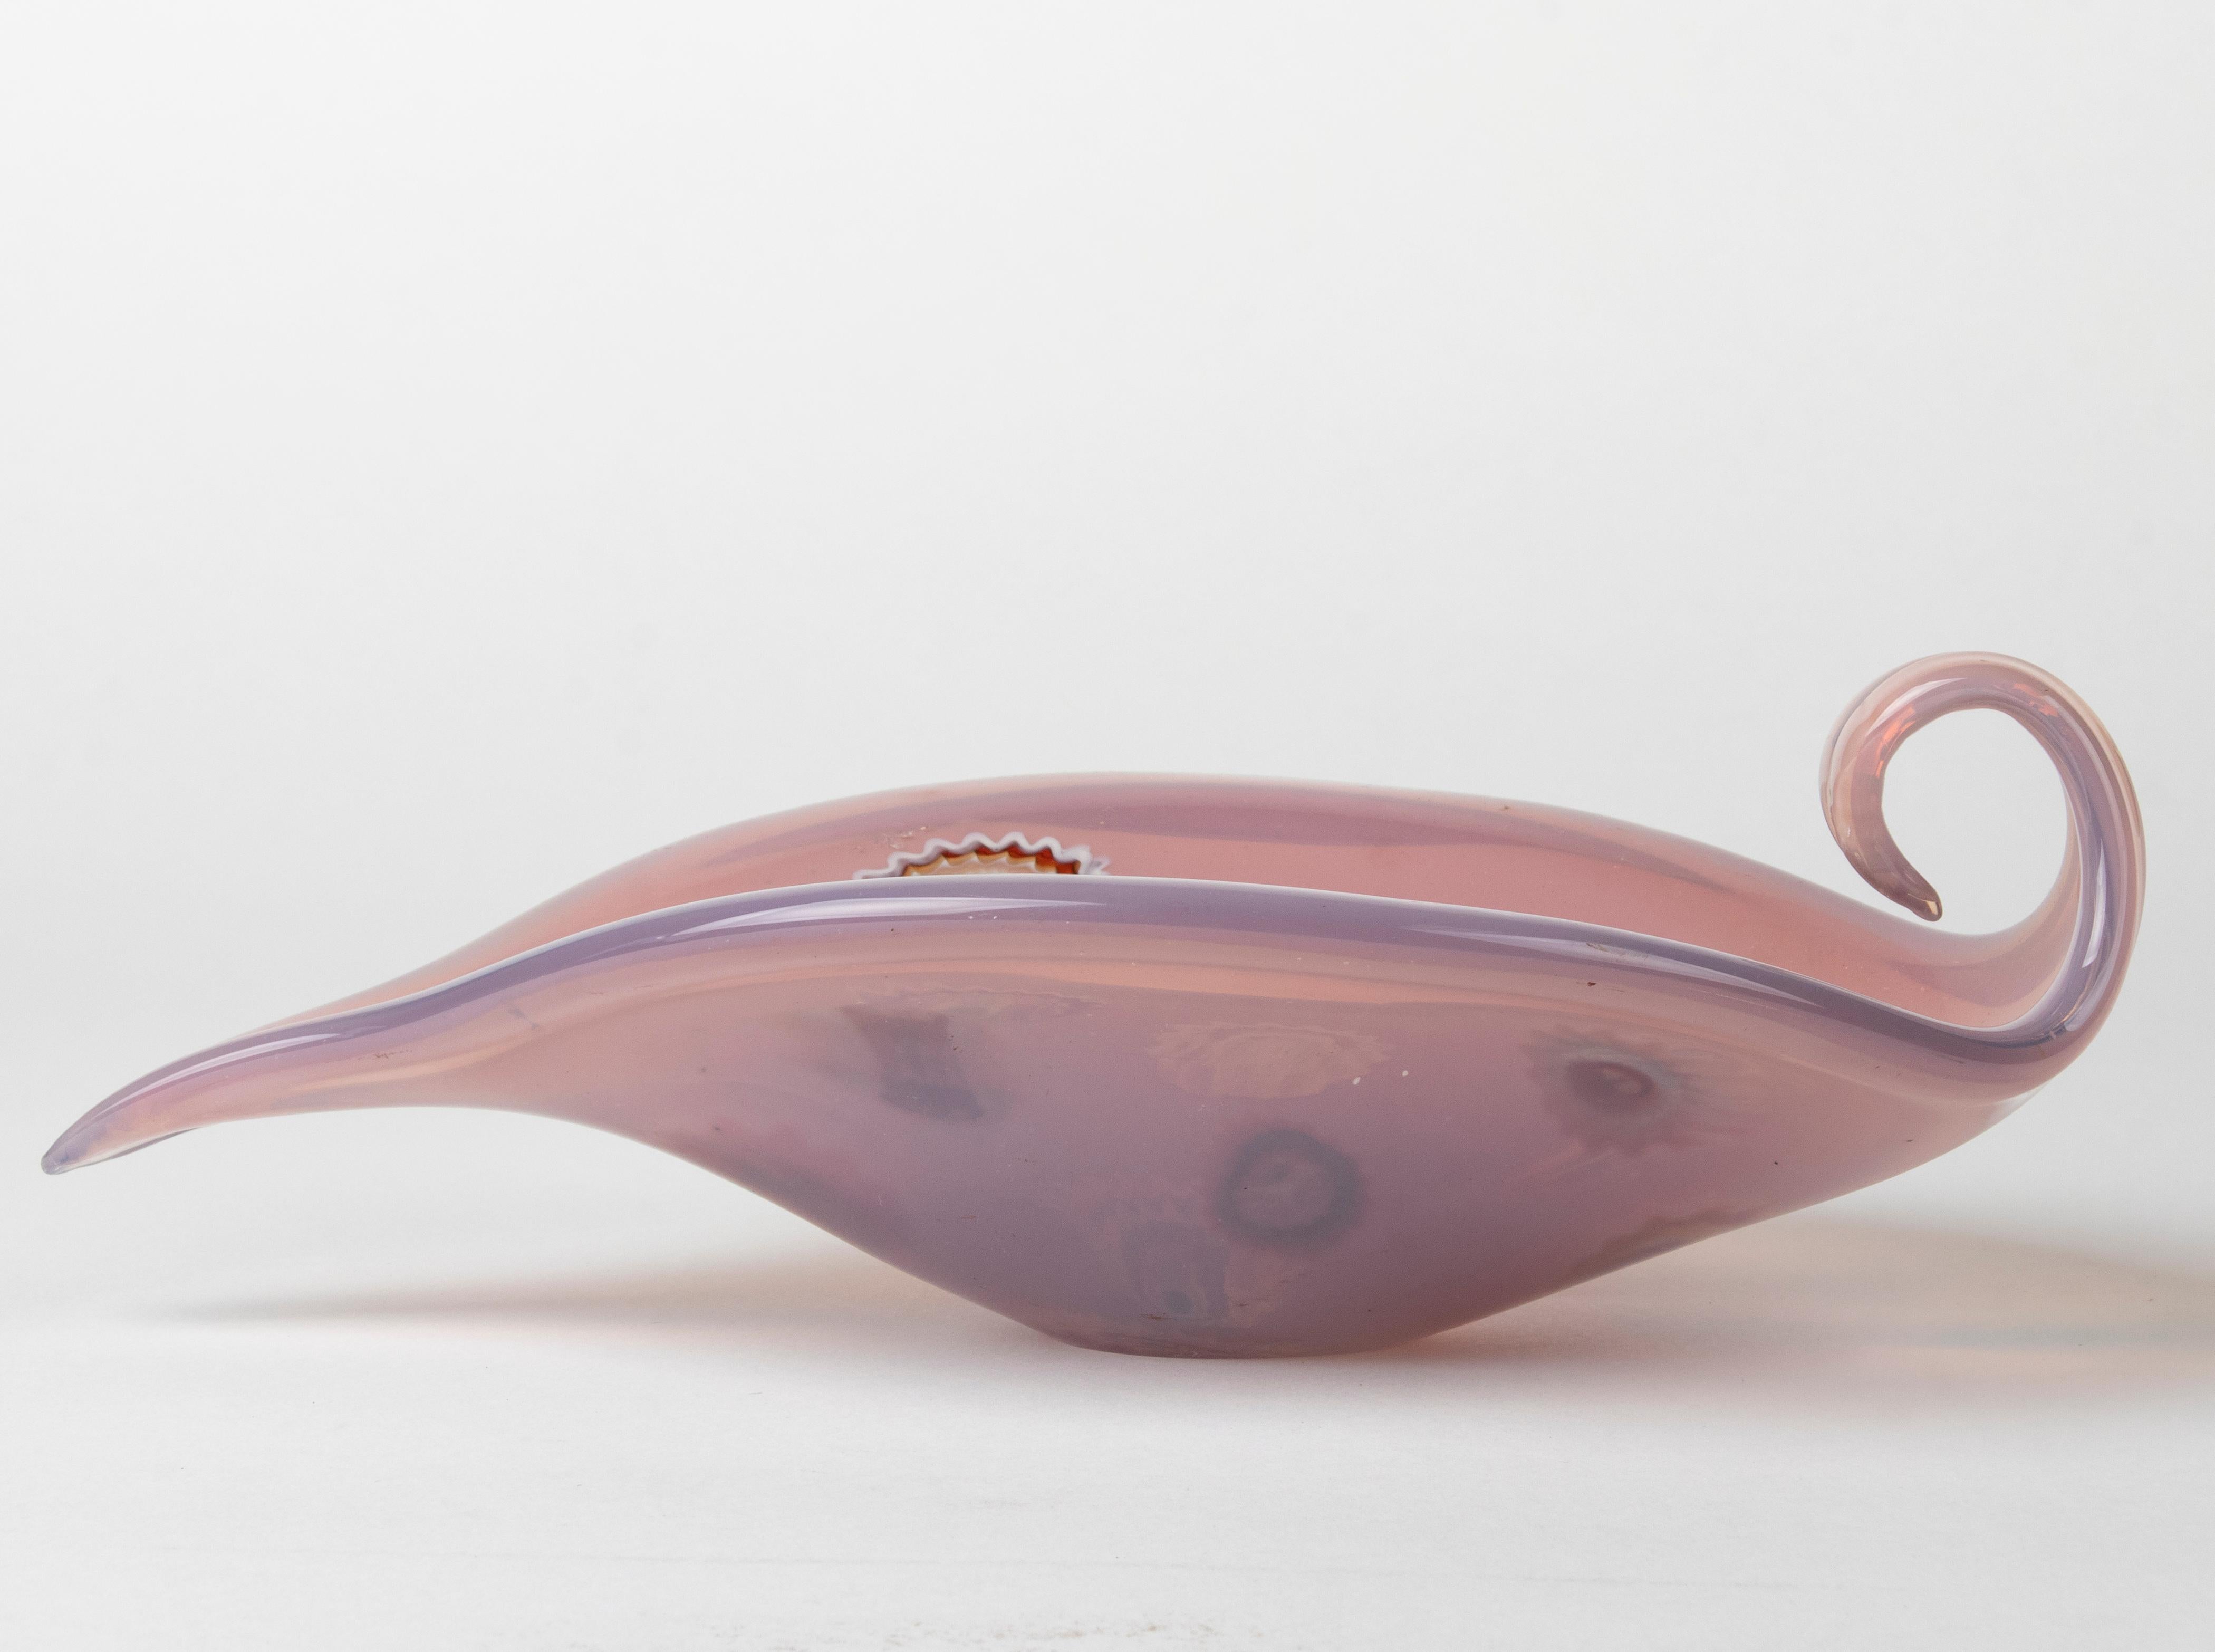 Decorative Murano glass bowl in a free, curled shape. The color is somewhere between pink and purple, decorated with so-called 'millefleurs' decorations. In good condition, no defects.